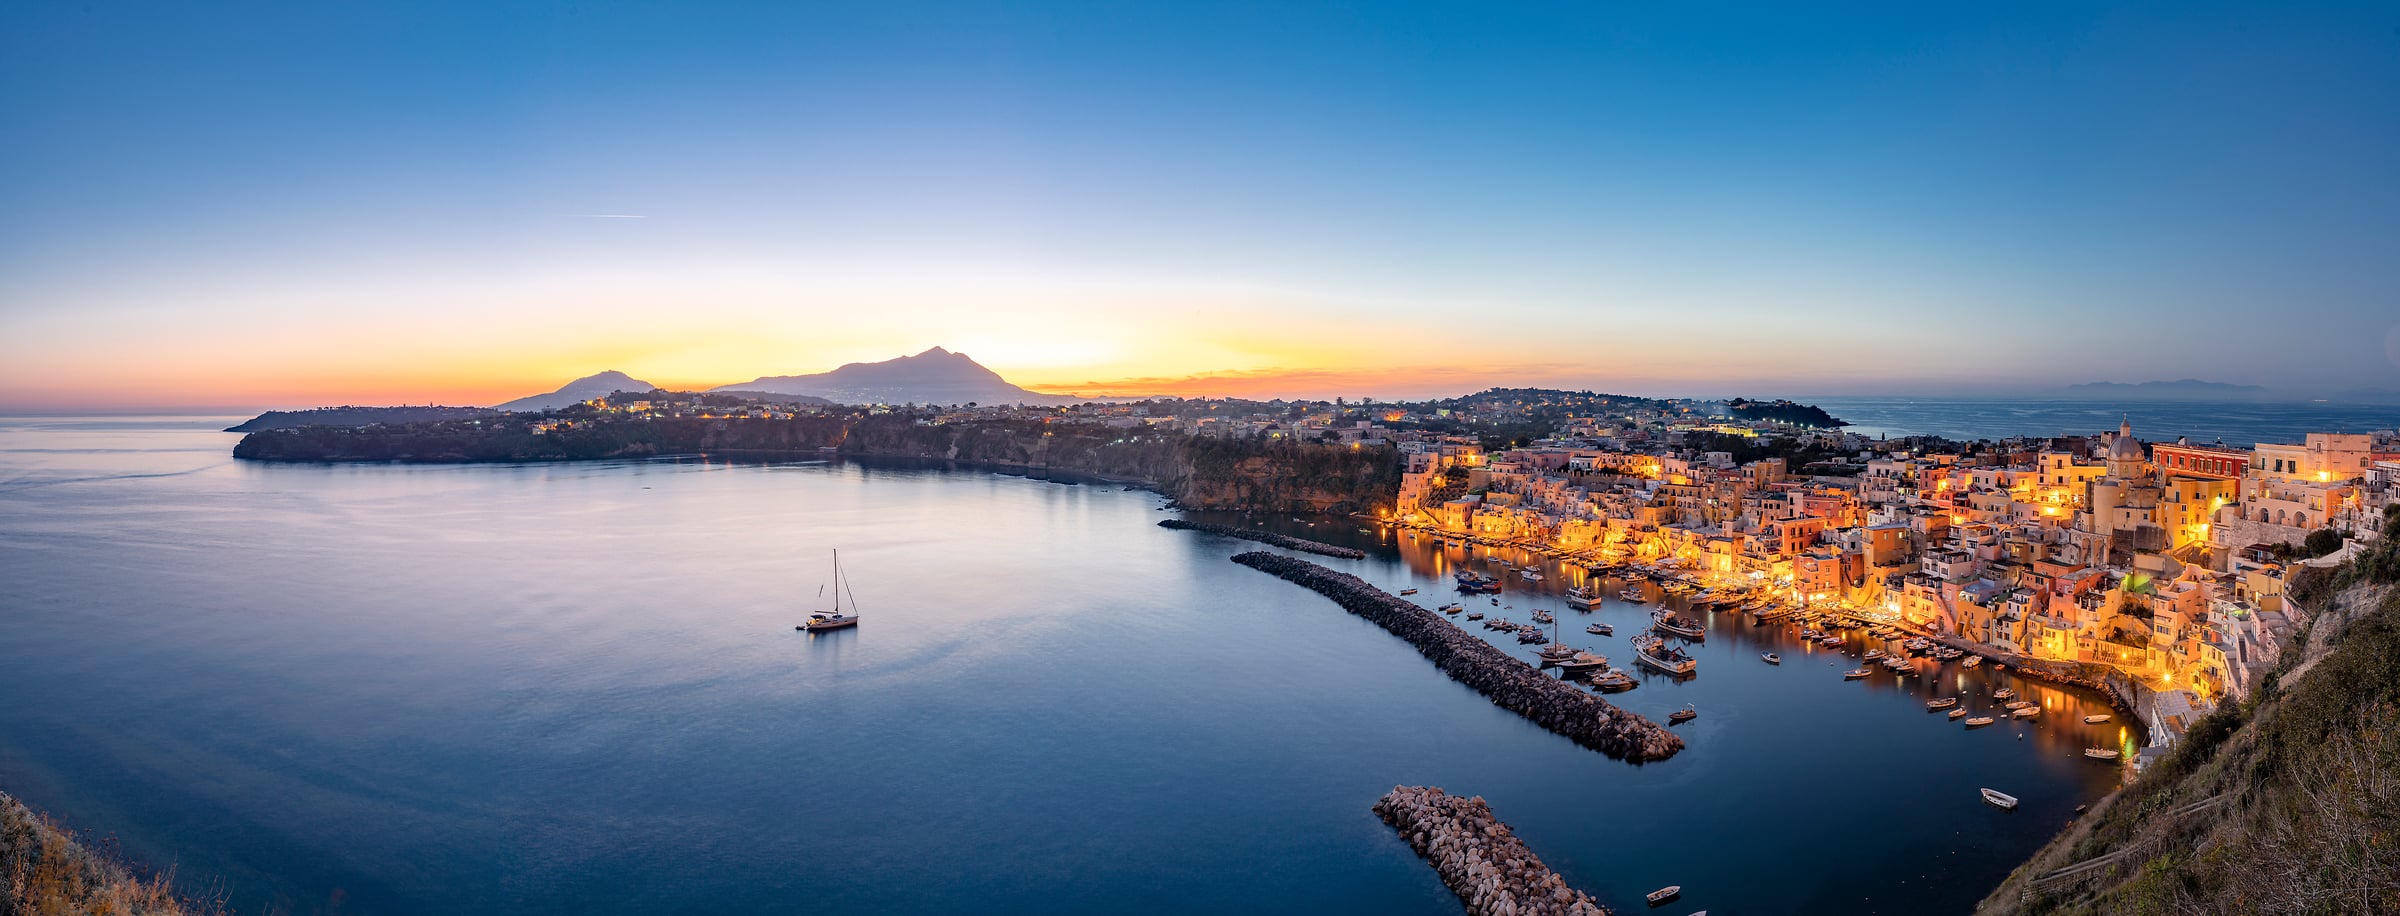 238 megapixels! A very high resolution, large-format VAST photo print of a peaceful harbor with boats and a city at dusk; landscape photograph created by Roberto Moiola in Procida, Naples, Italy.